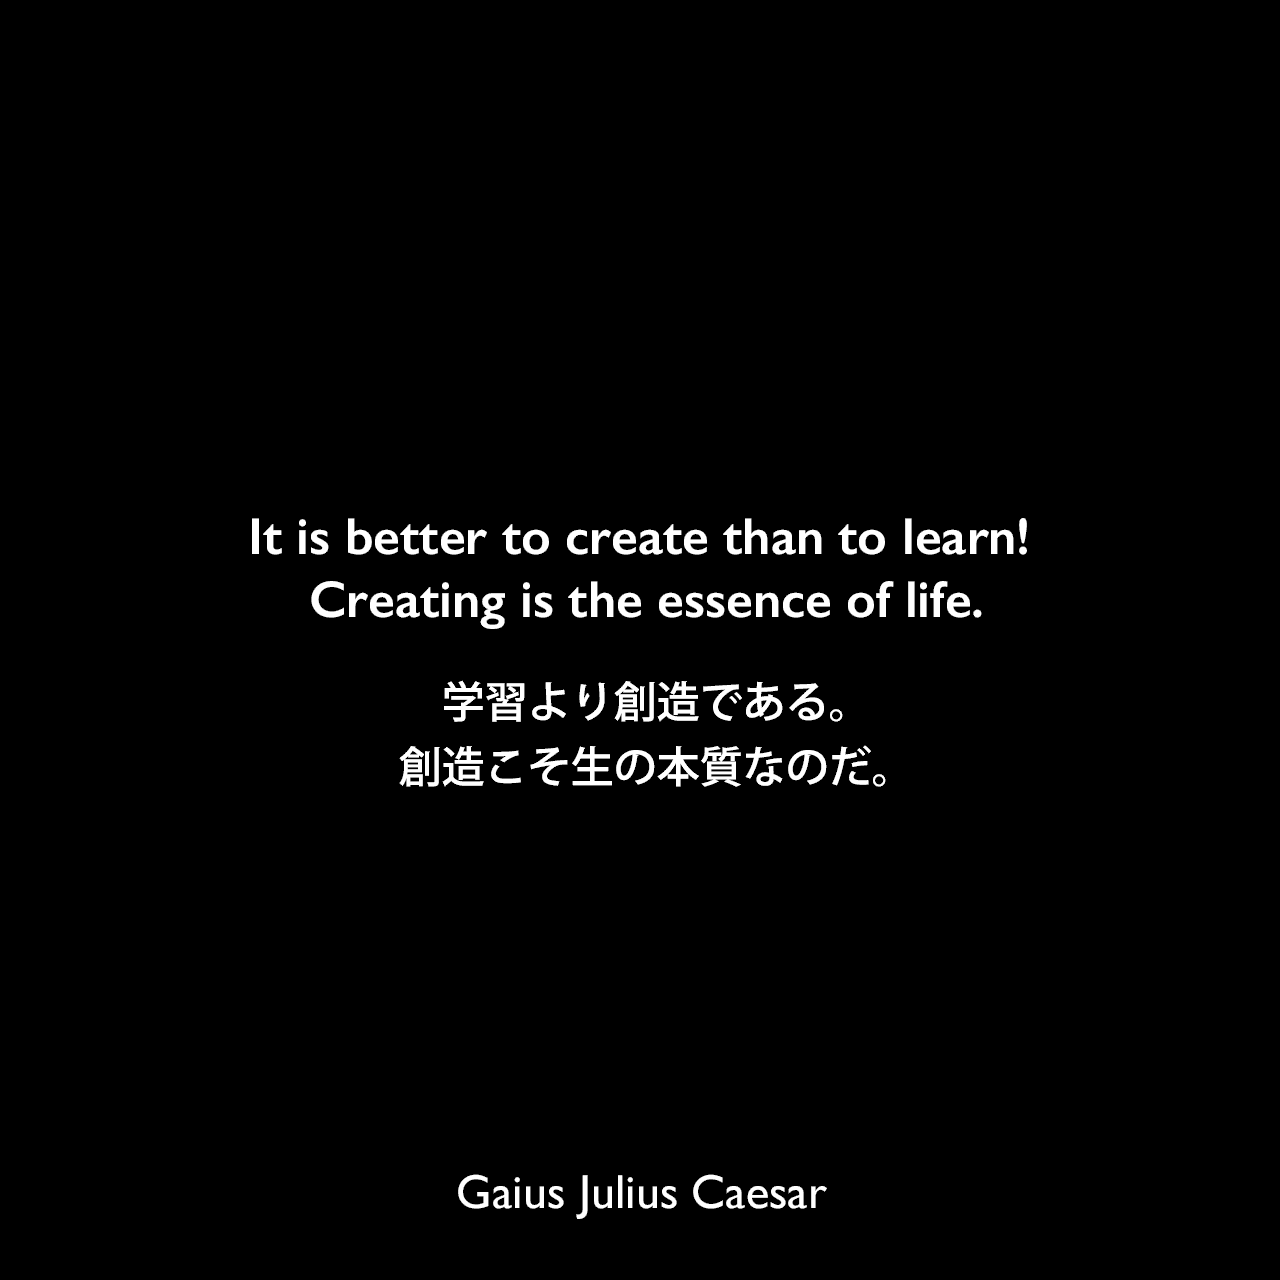 It is better to create than to learn! Creating is the essence of life.学習より創造である。創造こそ生の本質なのだ。Gaius Julius Caesar